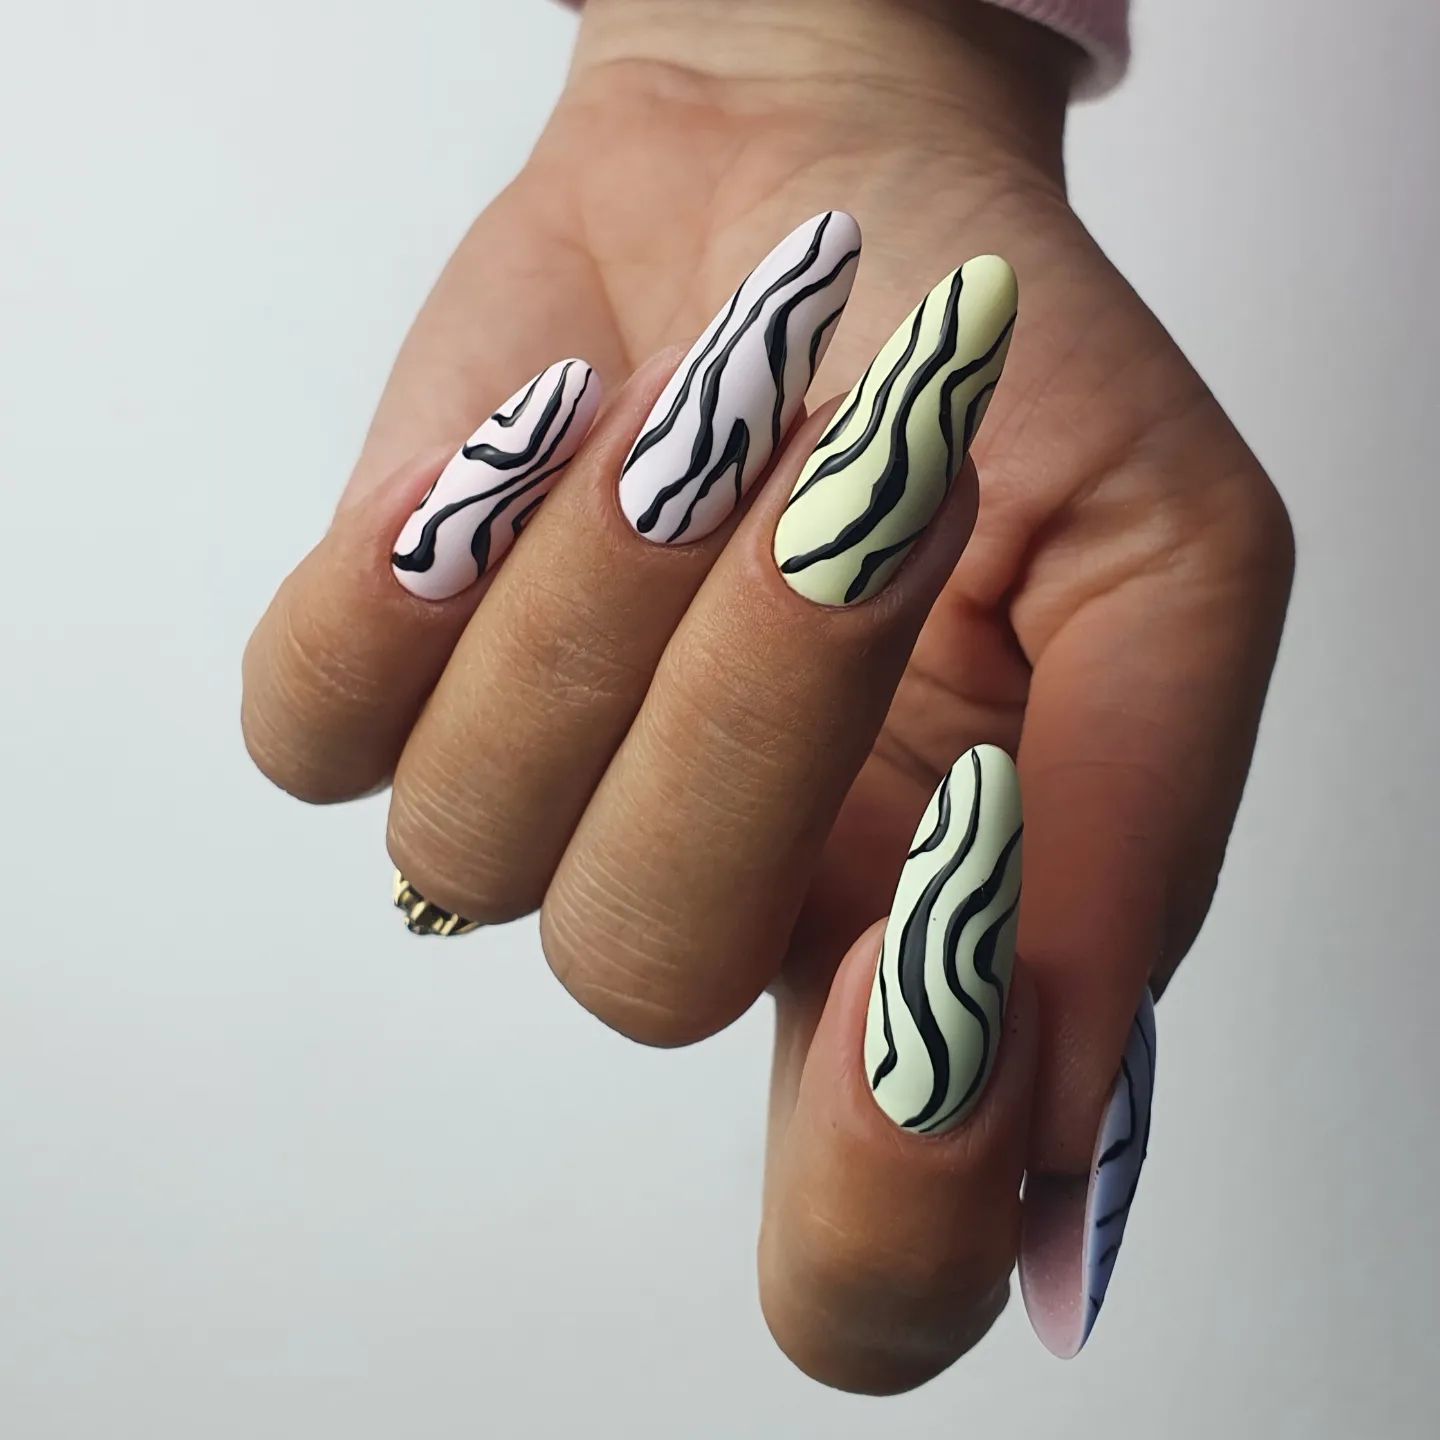 Nude Nails with Black Swirls